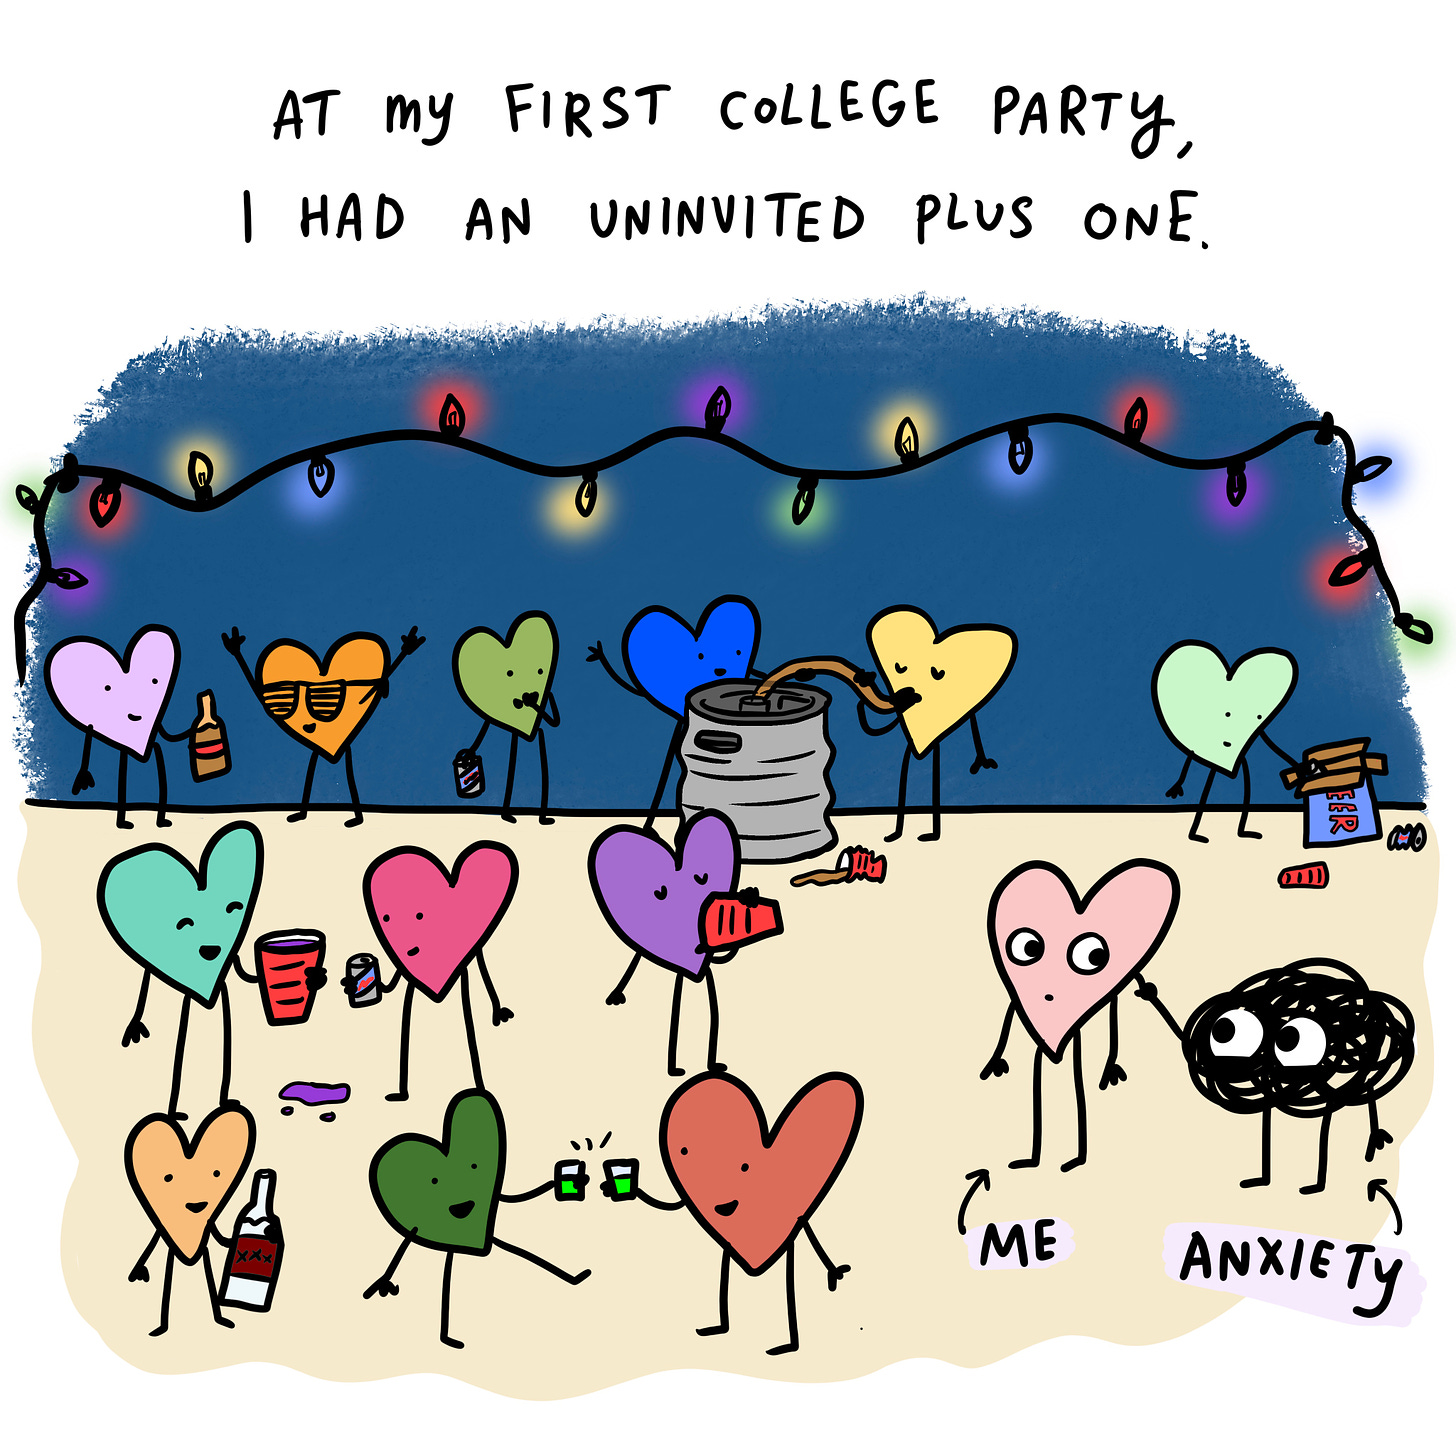 Slide one text: At my first college party, I had an uninvited plus one.  Illustration: Me standing at the door of a party with anxiety